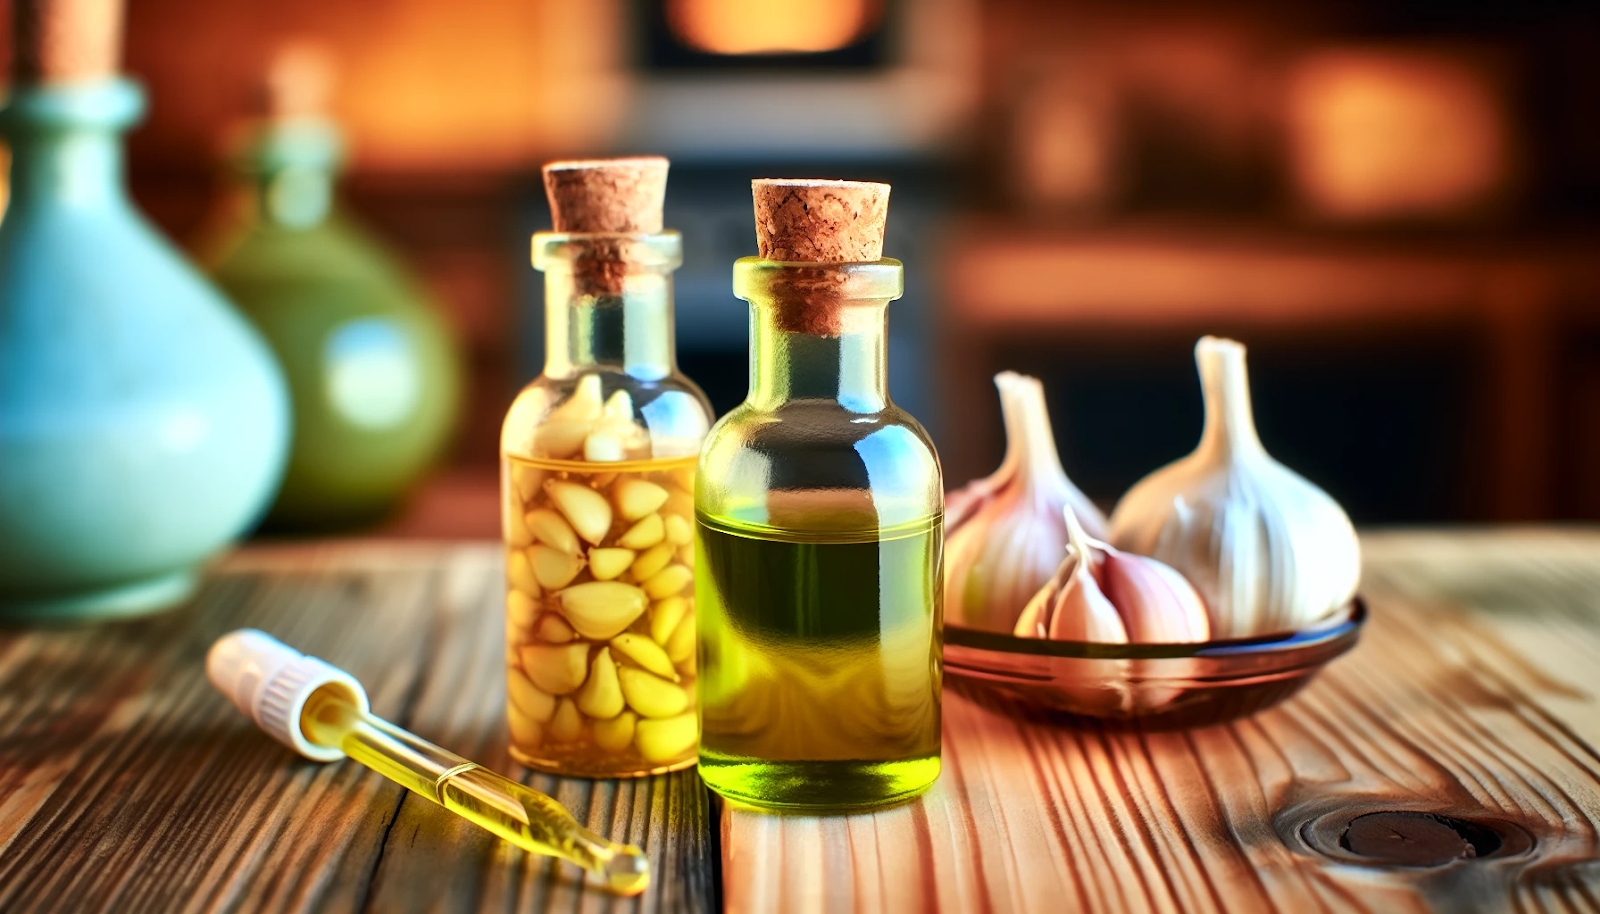 Photo of garlic and olive oil bottles